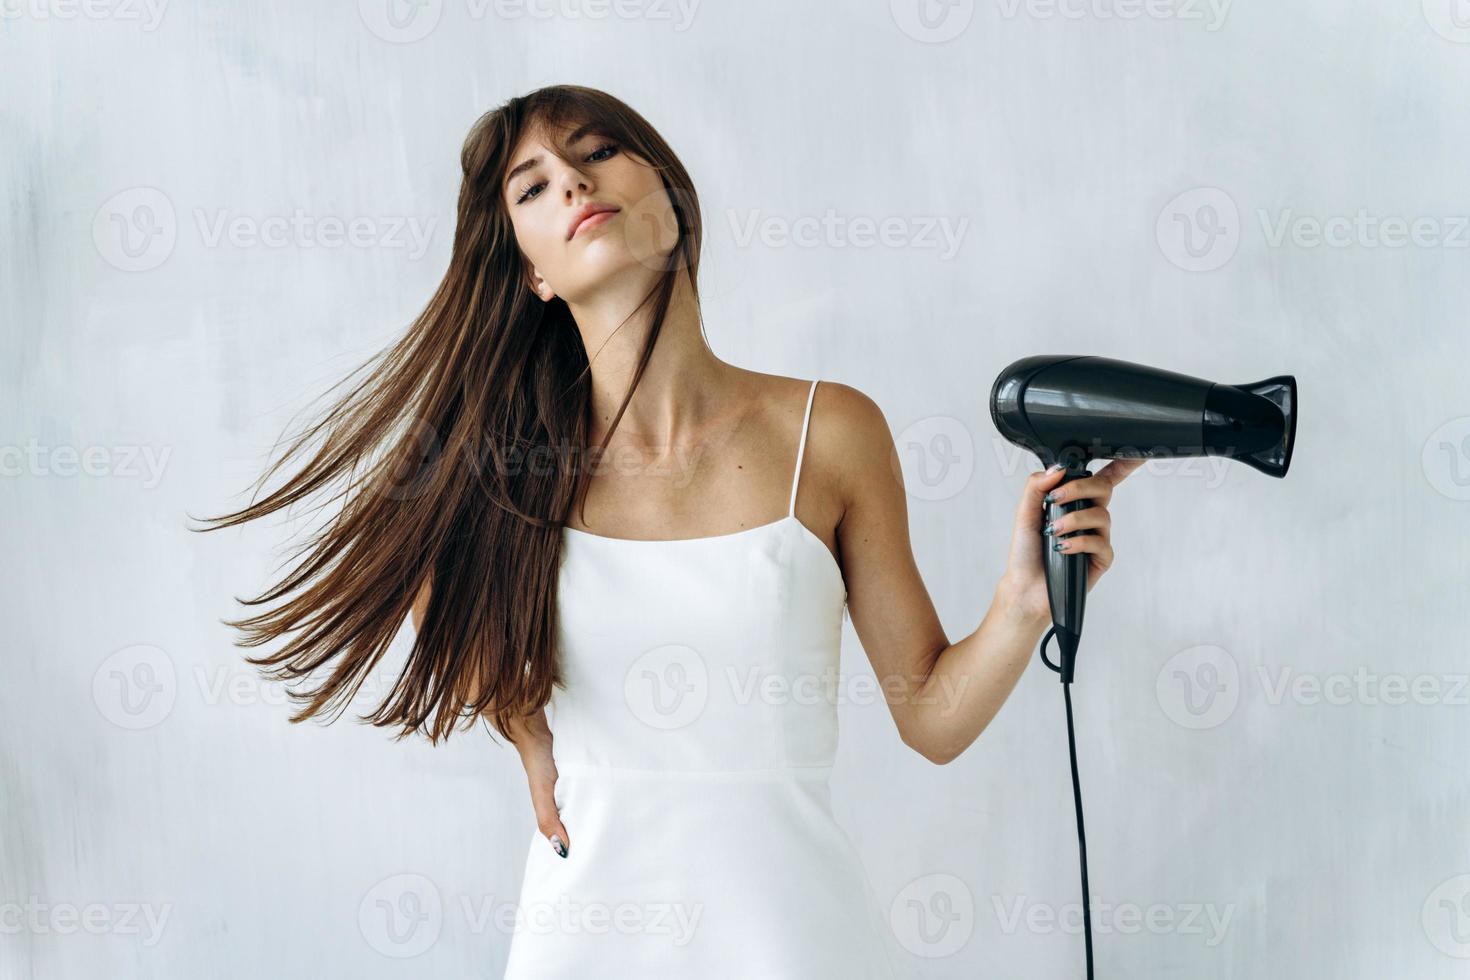 Portrait view of the sensual woman drying her hair in bathroom. Calm young woman blow drying hair in bathroom while feeling satisfied emotions. Stock photo